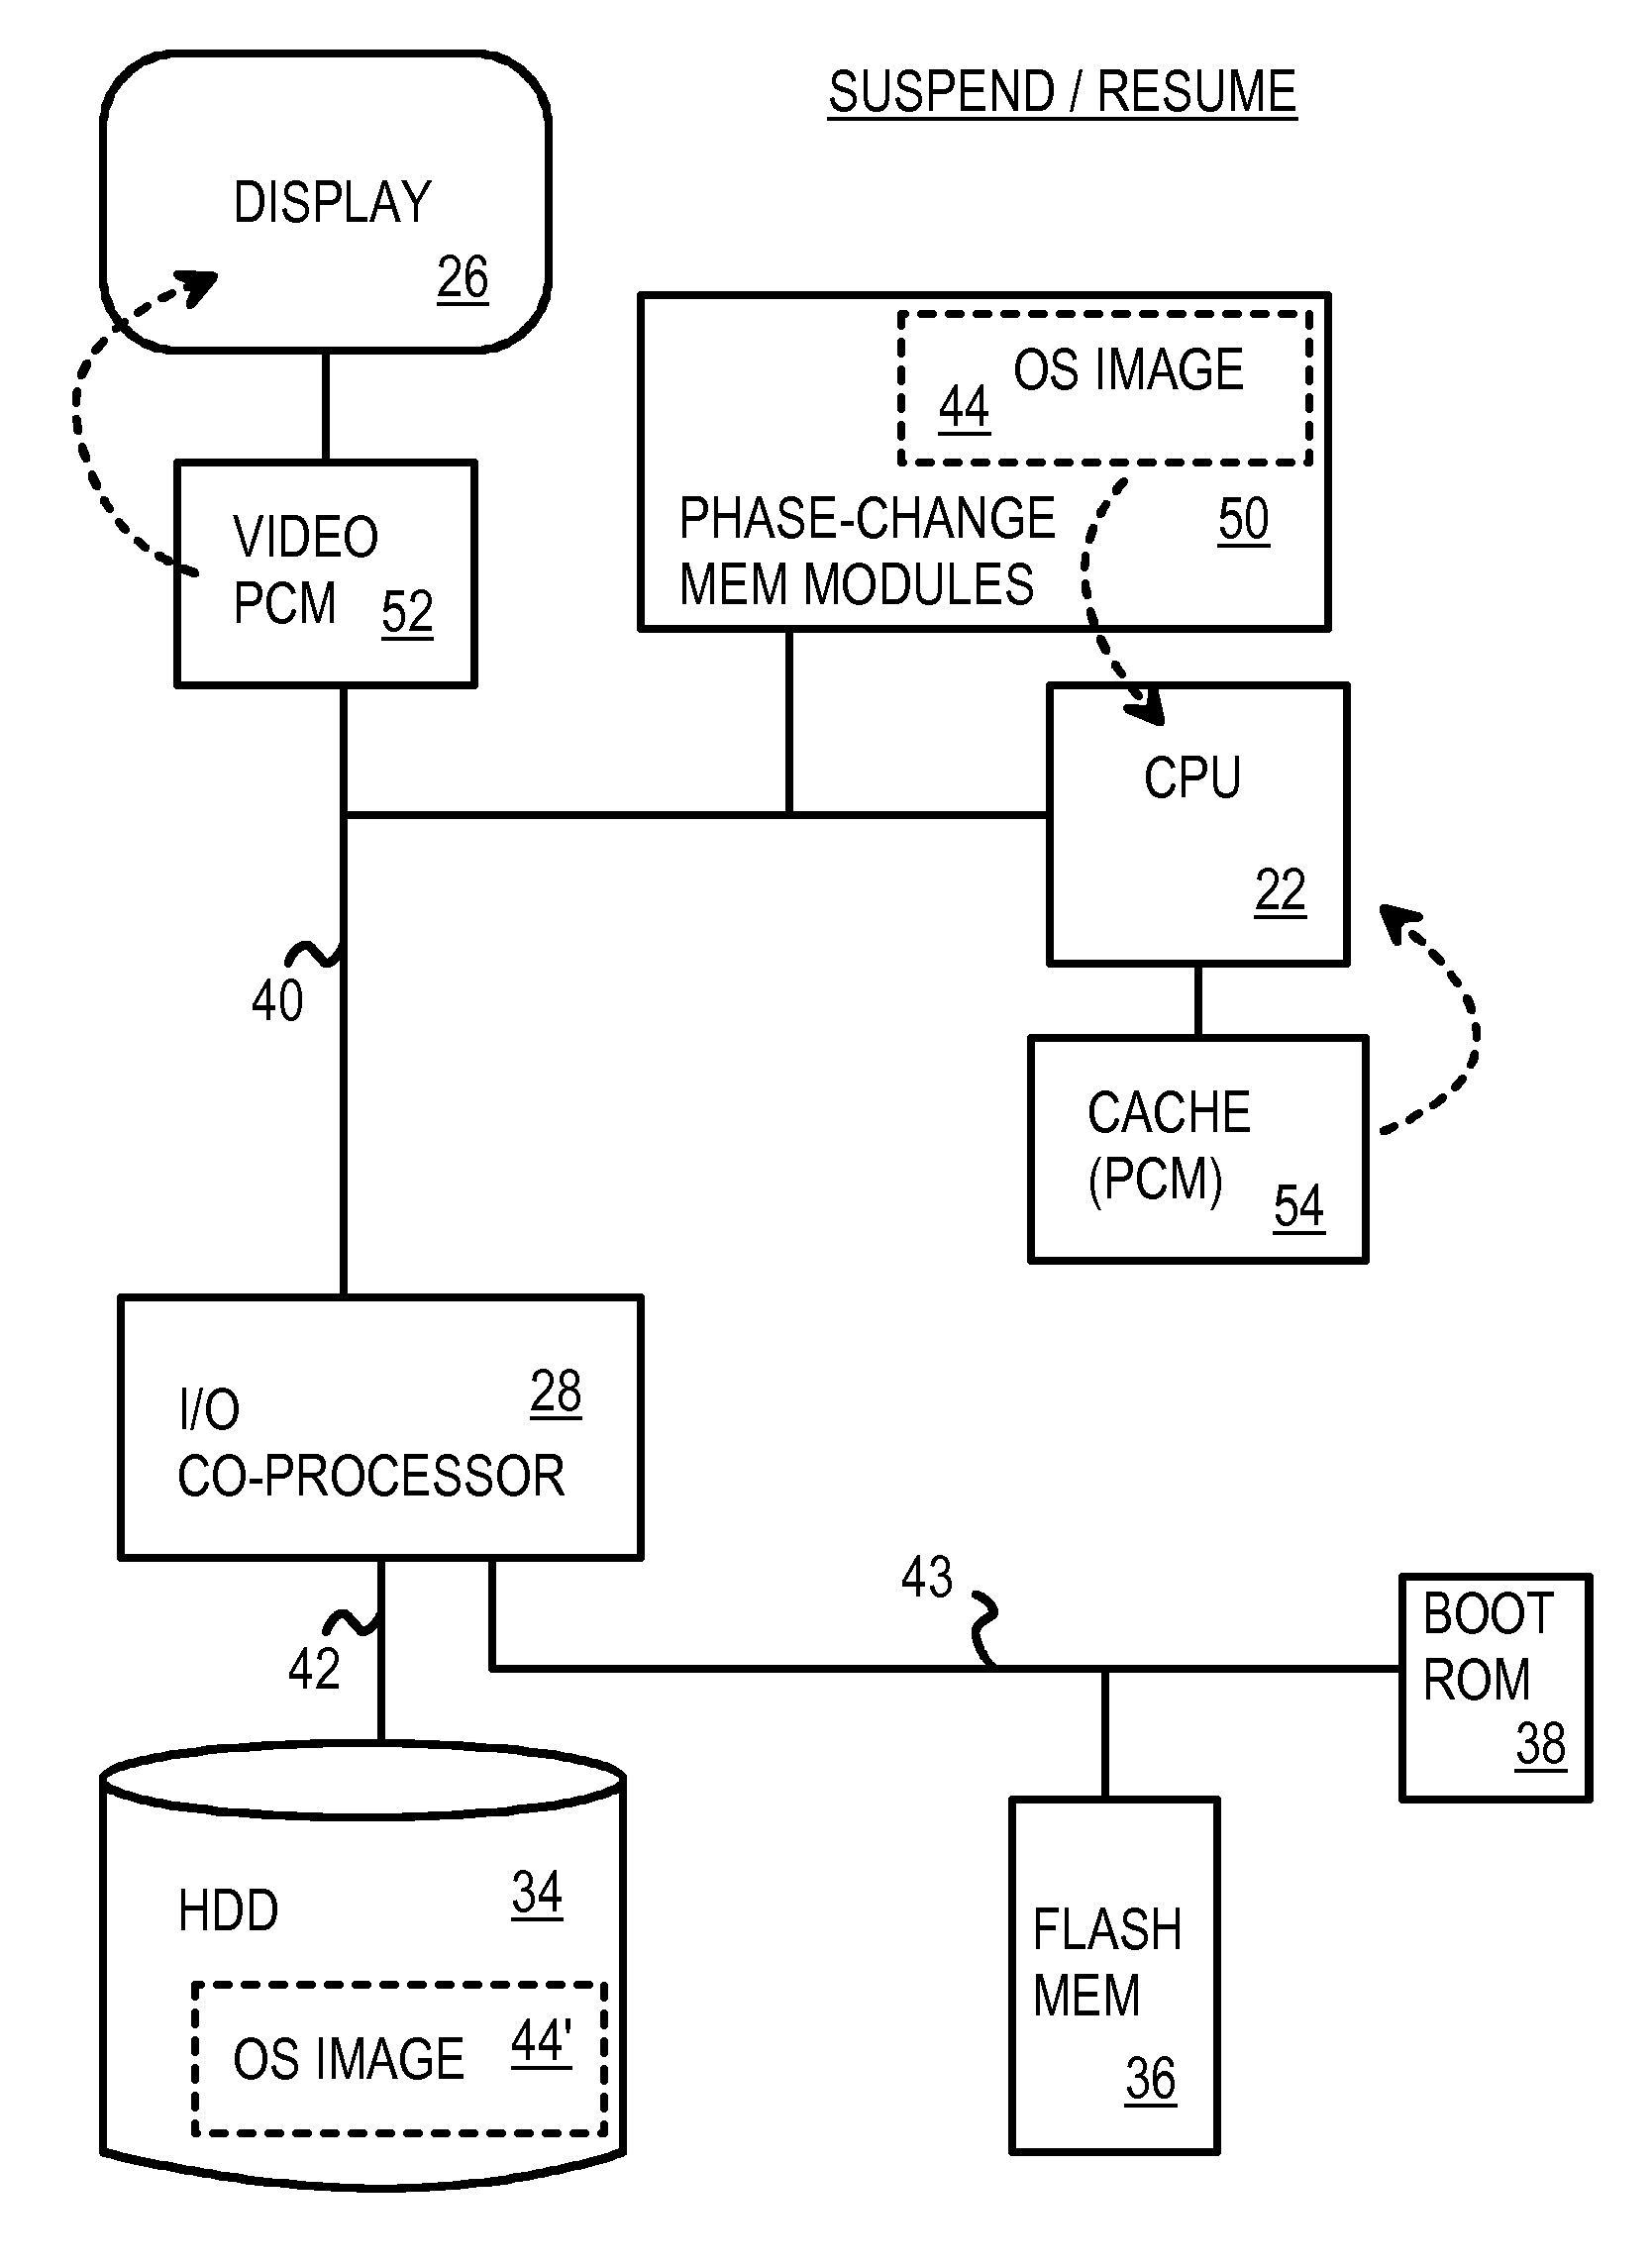 Fast Suspend-Resume of Computer Motherboard Using Phase-Change Memory